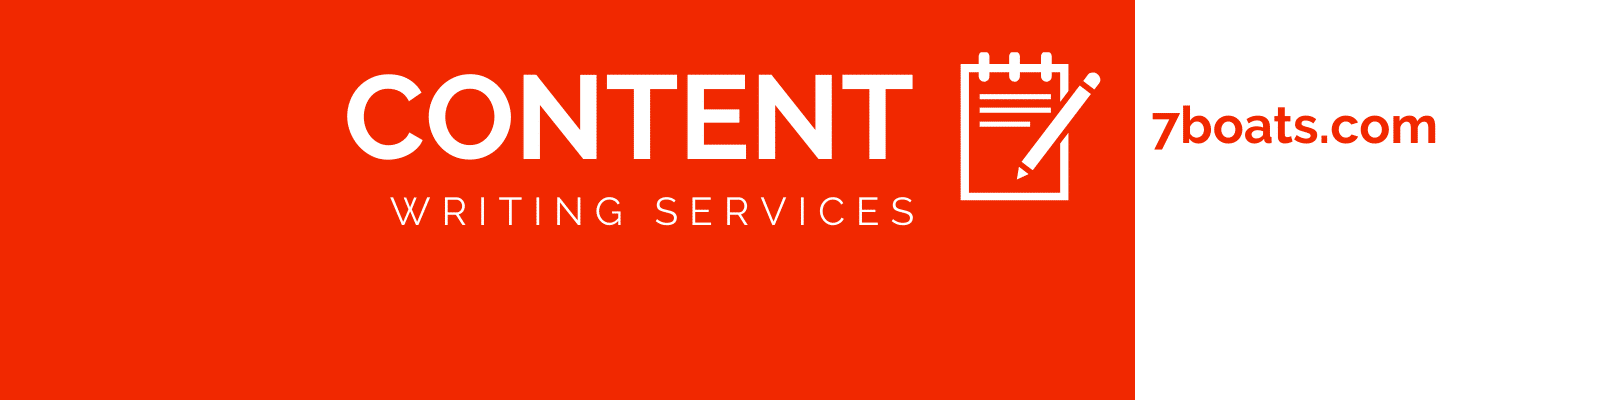 Content Writing Services by 7boats.com